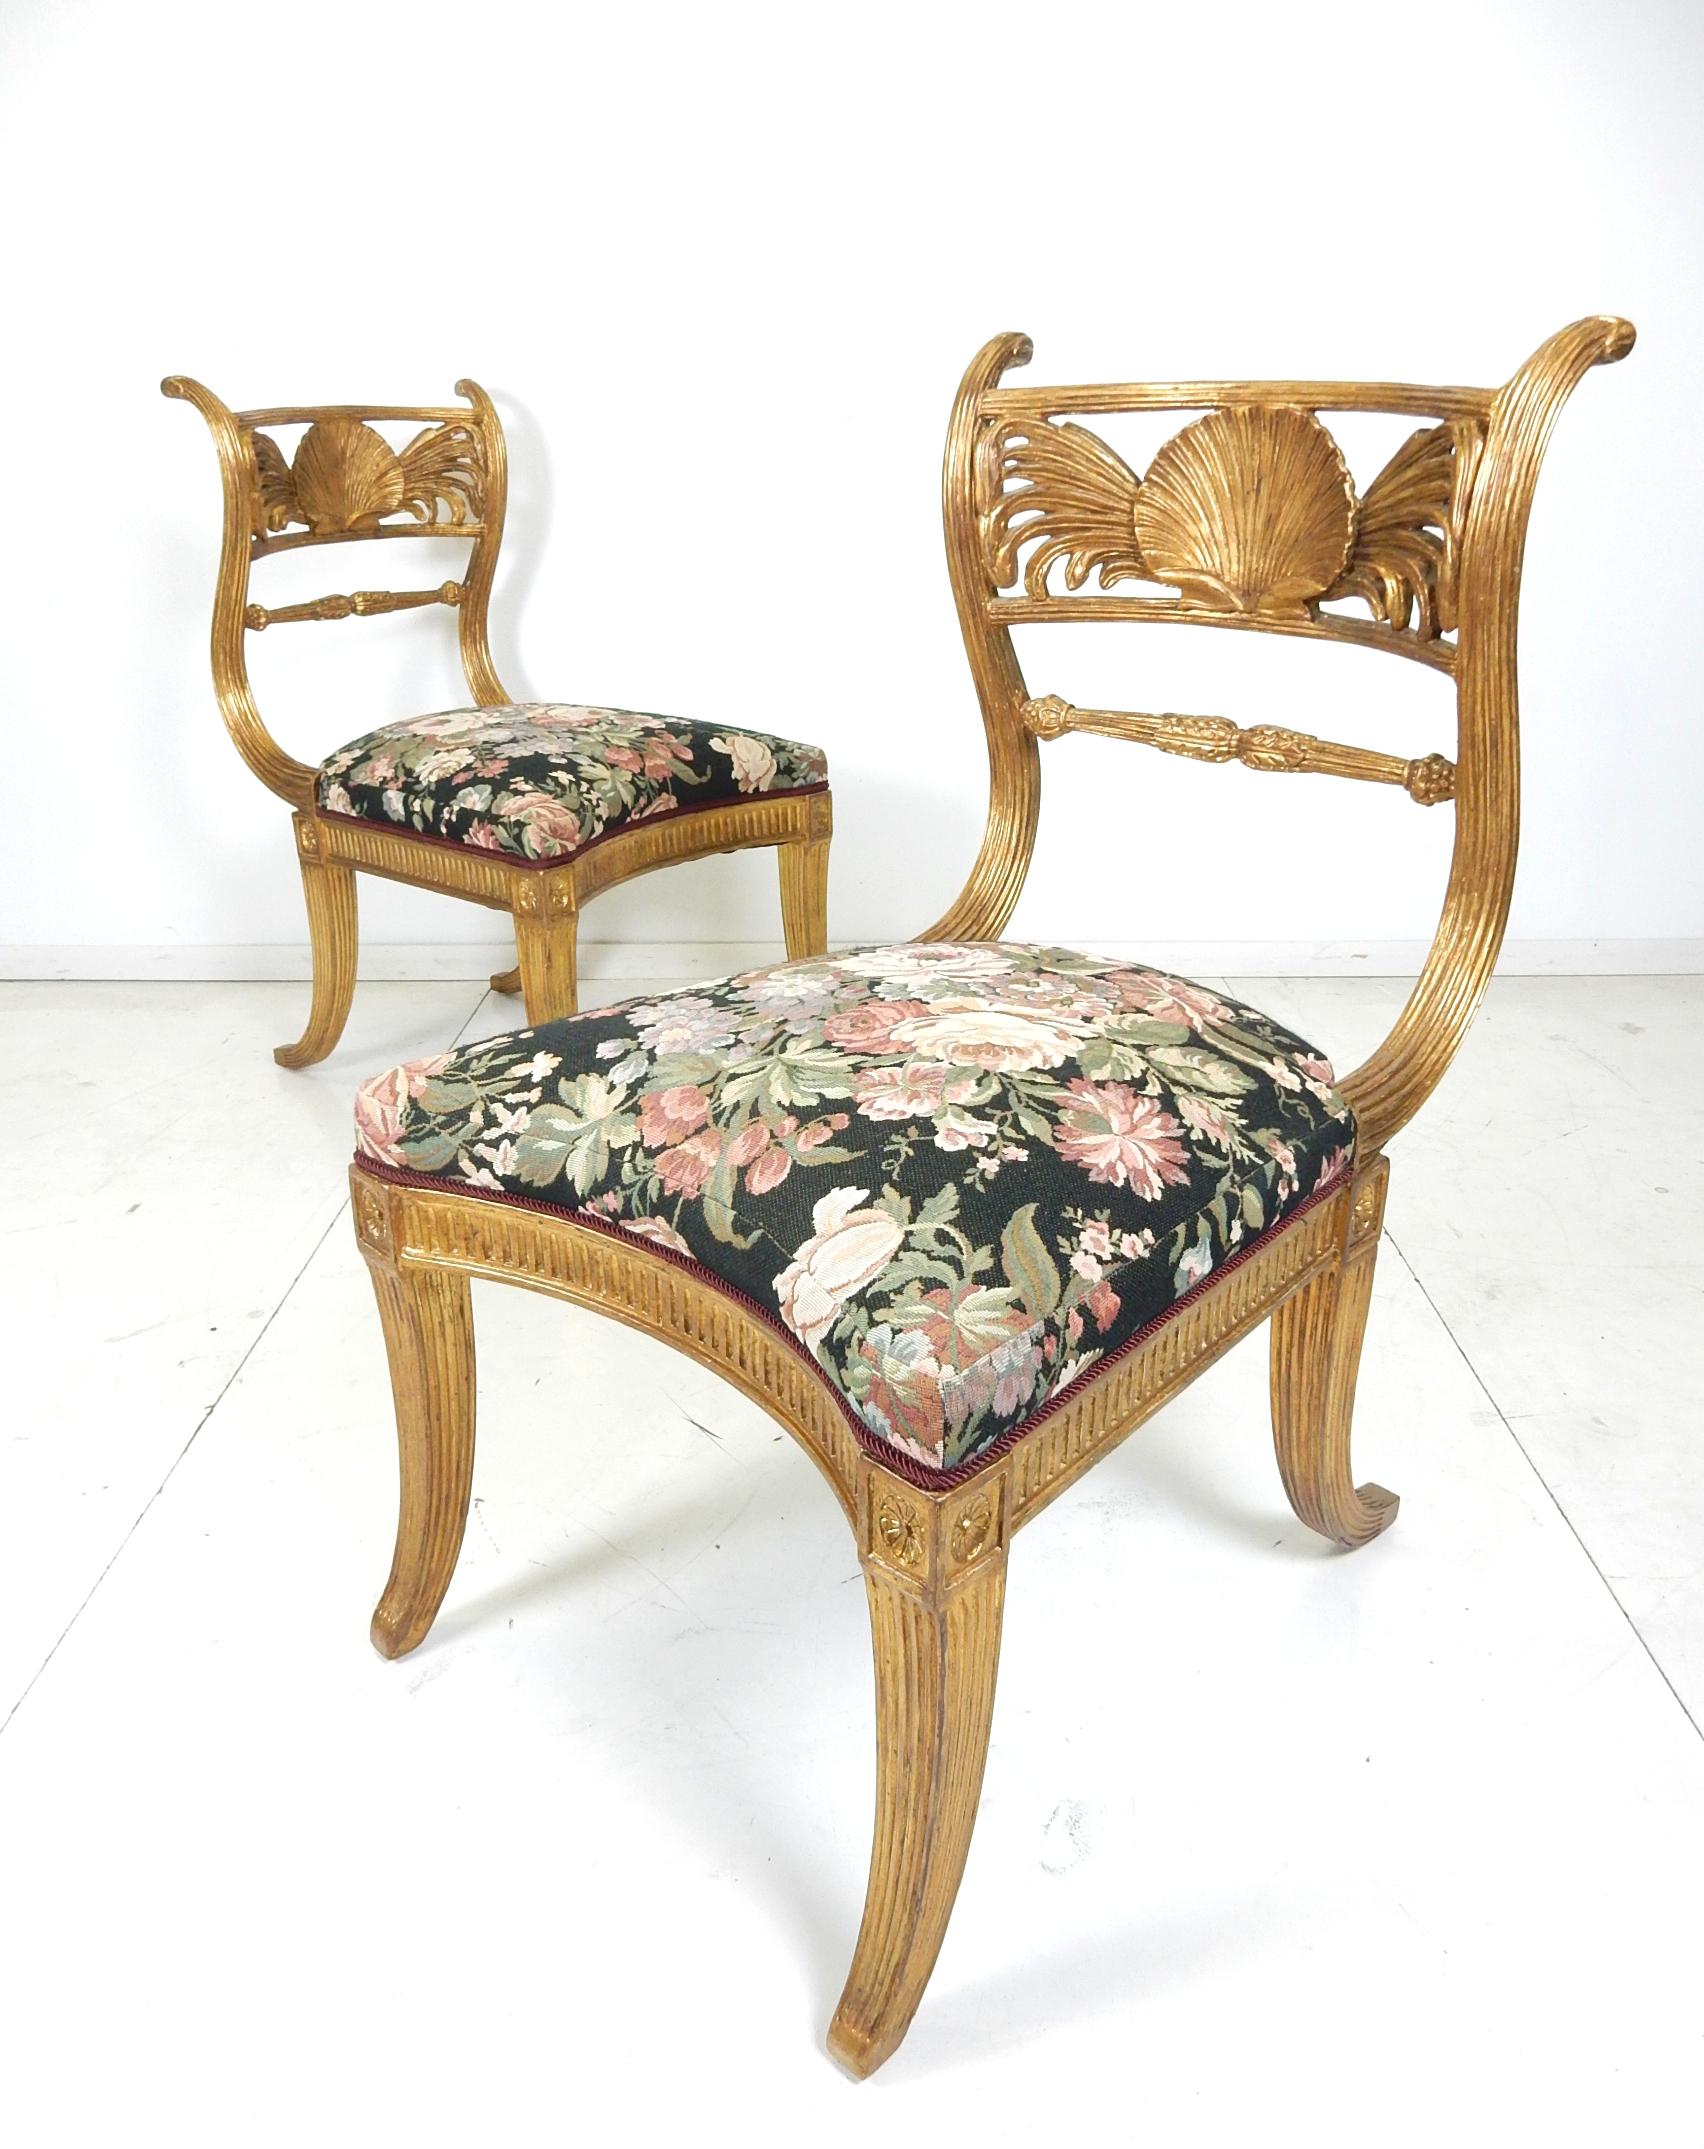 Phenomenal pair of elegant Klismos chairs from France, circa 1930s.
Antique gold gilded finish with magnificent rose garden upholstery.
Large size and very comfortable.
These chairs are in exceptional original condition. Solid with no damage or